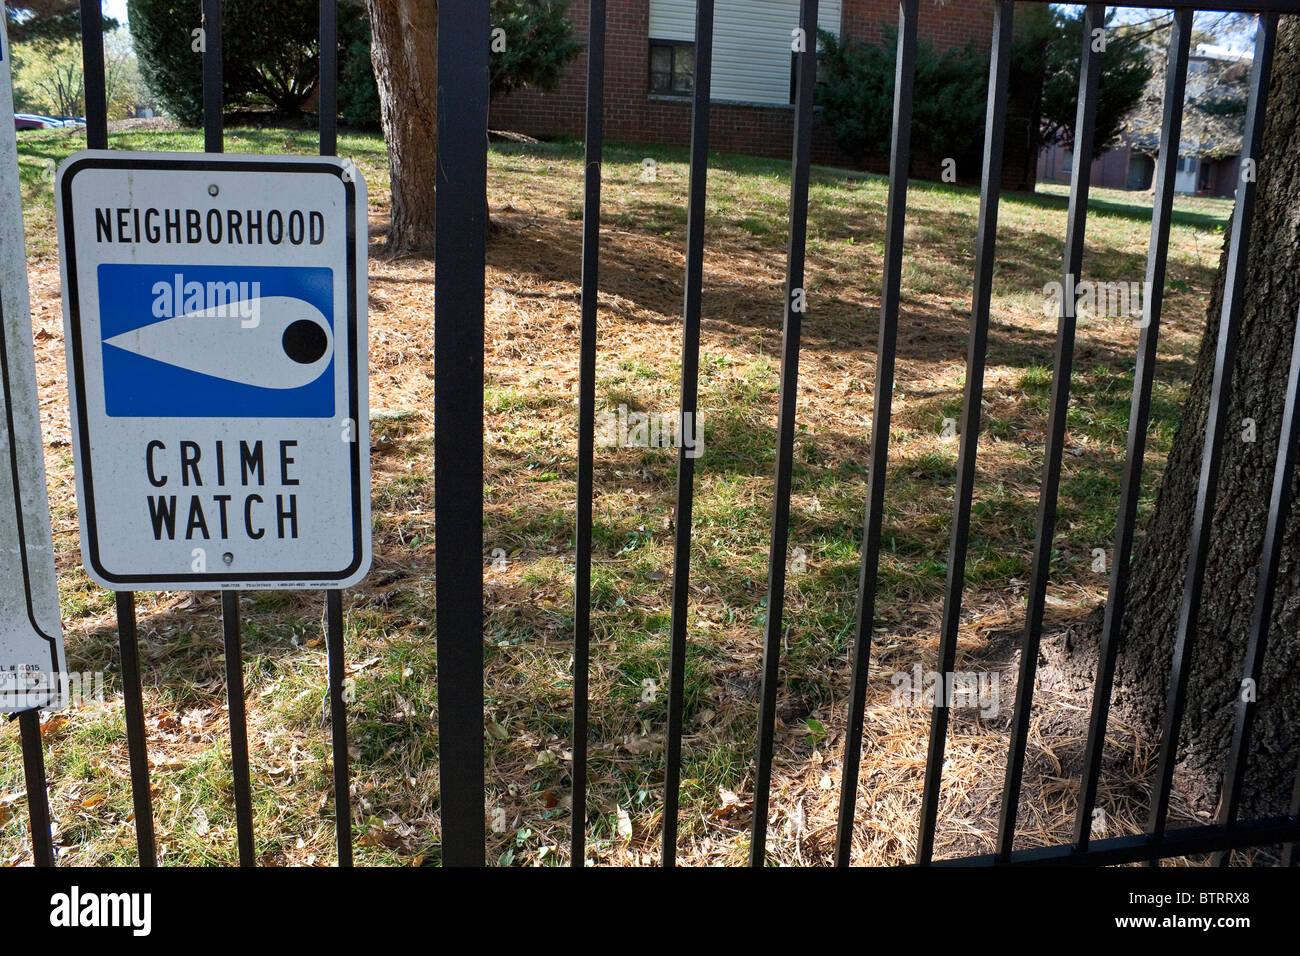 Crime watch sign Stock Photo